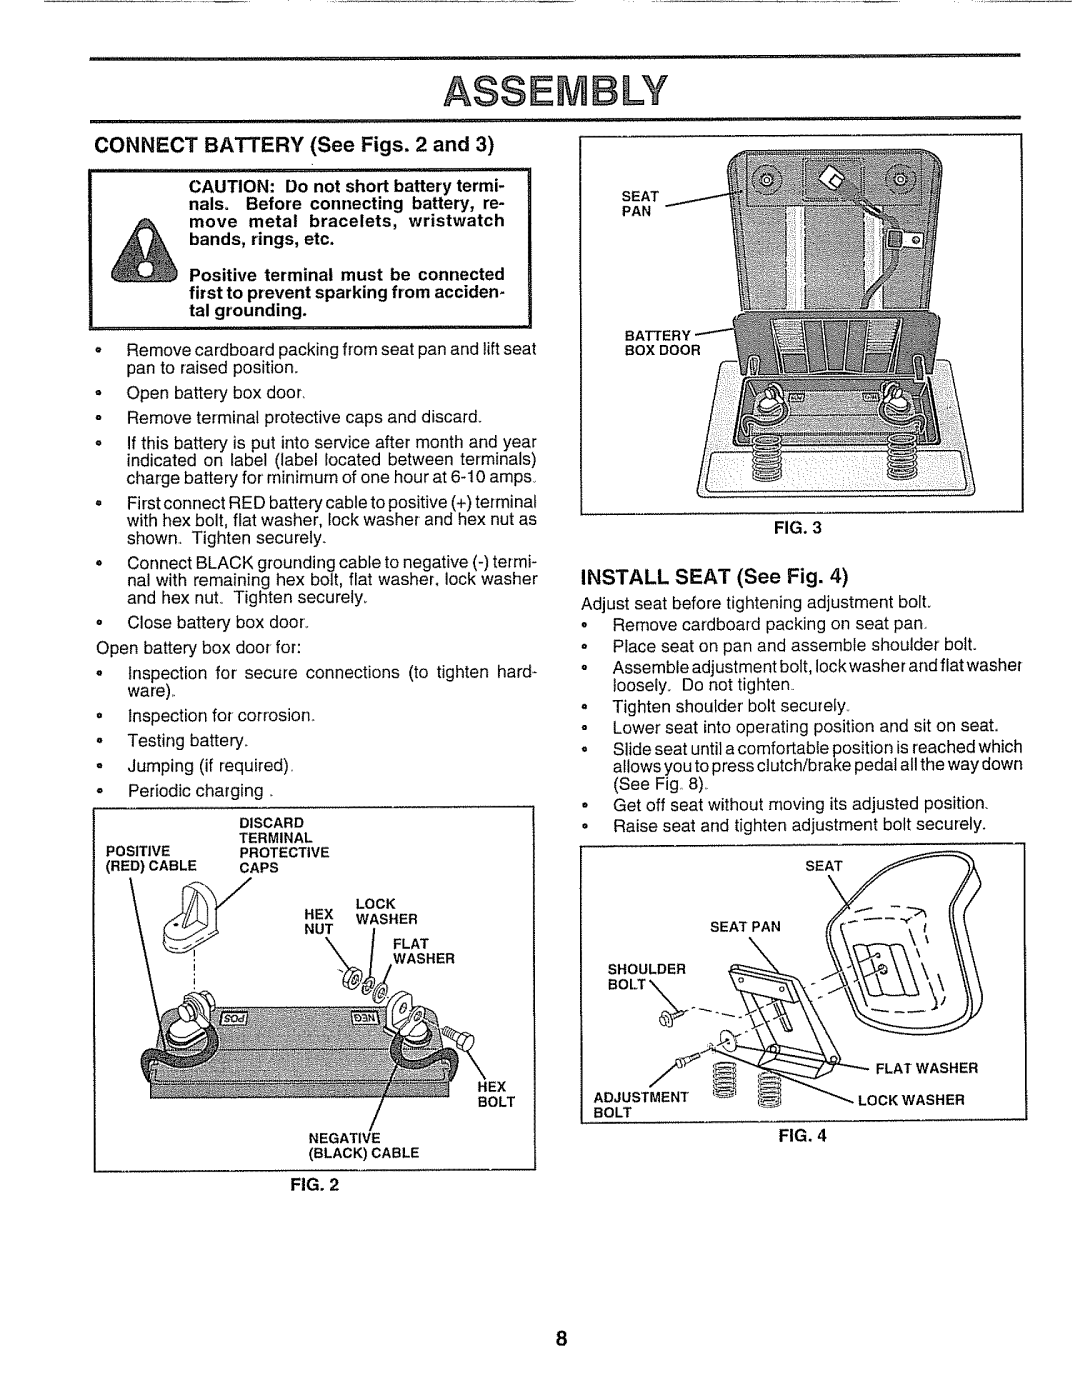 Craftsman 917.25651 owner manual Assembly, INSTALL SEAT See Fig 